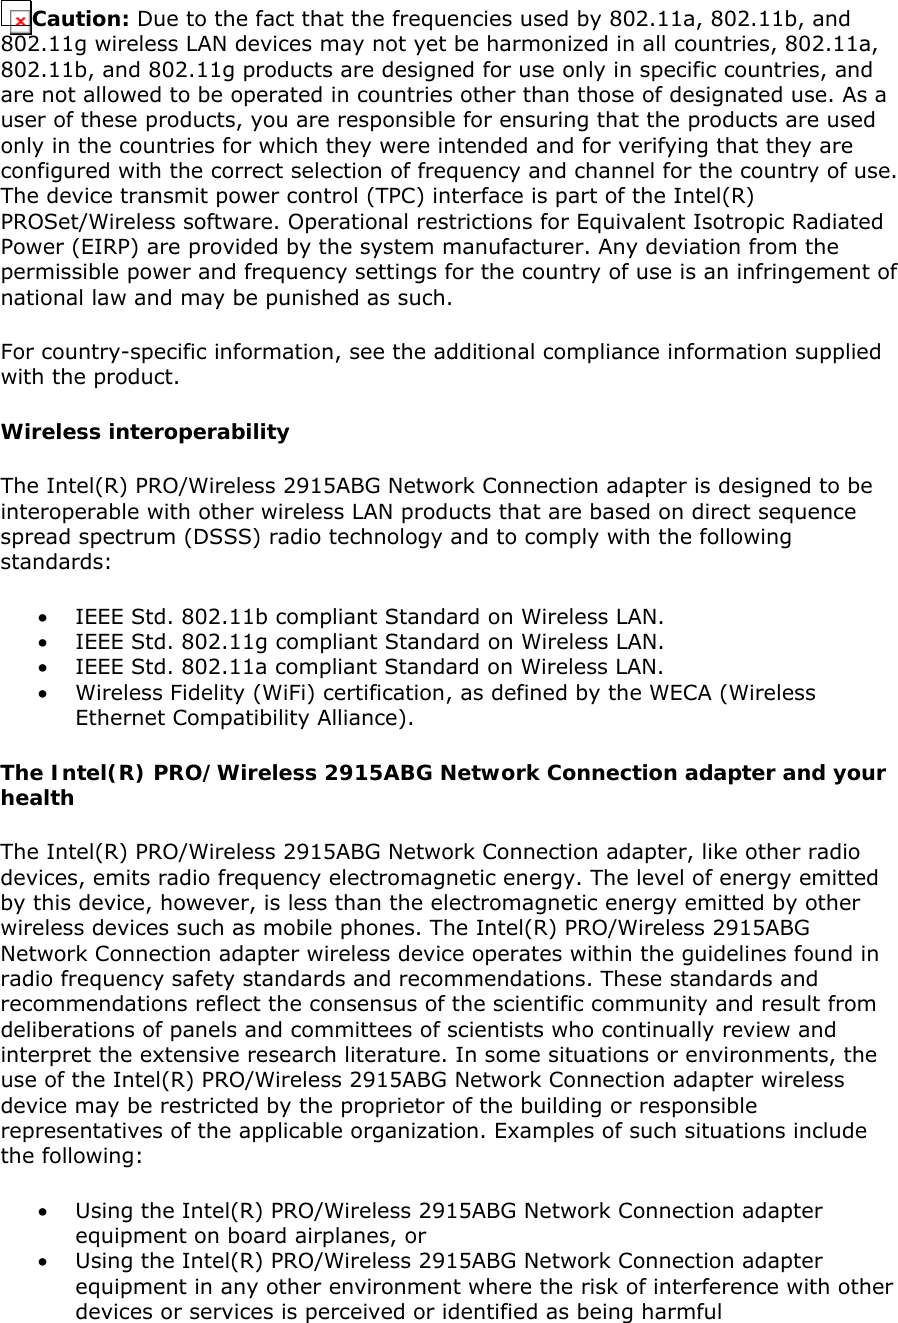 Caution: Due to the fact that the frequencies used by 802.11a, 802.11b, and 802.11g wireless LAN devices may not yet be harmonized in all countries, 802.11a, 802.11b, and 802.11g products are designed for use only in specific countries, and are not allowed to be operated in countries other than those of designated use. As a user of these products, you are responsible for ensuring that the products are used only in the countries for which they were intended and for verifying that they are configured with the correct selection of frequency and channel for the country of use. The device transmit power control (TPC) interface is part of the Intel(R) PROSet/Wireless software. Operational restrictions for Equivalent Isotropic Radiated Power (EIRP) are provided by the system manufacturer. Any deviation from the permissible power and frequency settings for the country of use is an infringement of national law and may be punished as such.  For country-specific information, see the additional compliance information supplied with the product.  Wireless interoperability The Intel(R) PRO/Wireless 2915ABG Network Connection adapter is designed to be interoperable with other wireless LAN products that are based on direct sequence spread spectrum (DSSS) radio technology and to comply with the following standards:  • IEEE Std. 802.11b compliant Standard on Wireless LAN.  • IEEE Std. 802.11g compliant Standard on Wireless LAN.  • IEEE Std. 802.11a compliant Standard on Wireless LAN.  • Wireless Fidelity (WiFi) certification, as defined by the WECA (Wireless Ethernet Compatibility Alliance). The Intel(R) PRO/Wireless 2915ABG Network Connection adapter and your health The Intel(R) PRO/Wireless 2915ABG Network Connection adapter, like other radio devices, emits radio frequency electromagnetic energy. The level of energy emitted by this device, however, is less than the electromagnetic energy emitted by other wireless devices such as mobile phones. The Intel(R) PRO/Wireless 2915ABG Network Connection adapter wireless device operates within the guidelines found in radio frequency safety standards and recommendations. These standards and recommendations reflect the consensus of the scientific community and result from deliberations of panels and committees of scientists who continually review and interpret the extensive research literature. In some situations or environments, the use of the Intel(R) PRO/Wireless 2915ABG Network Connection adapter wireless device may be restricted by the proprietor of the building or responsible representatives of the applicable organization. Examples of such situations include the following:  • Using the Intel(R) PRO/Wireless 2915ABG Network Connection adapter equipment on board airplanes, or  • Using the Intel(R) PRO/Wireless 2915ABG Network Connection adapter equipment in any other environment where the risk of interference with other devices or services is perceived or identified as being harmful 